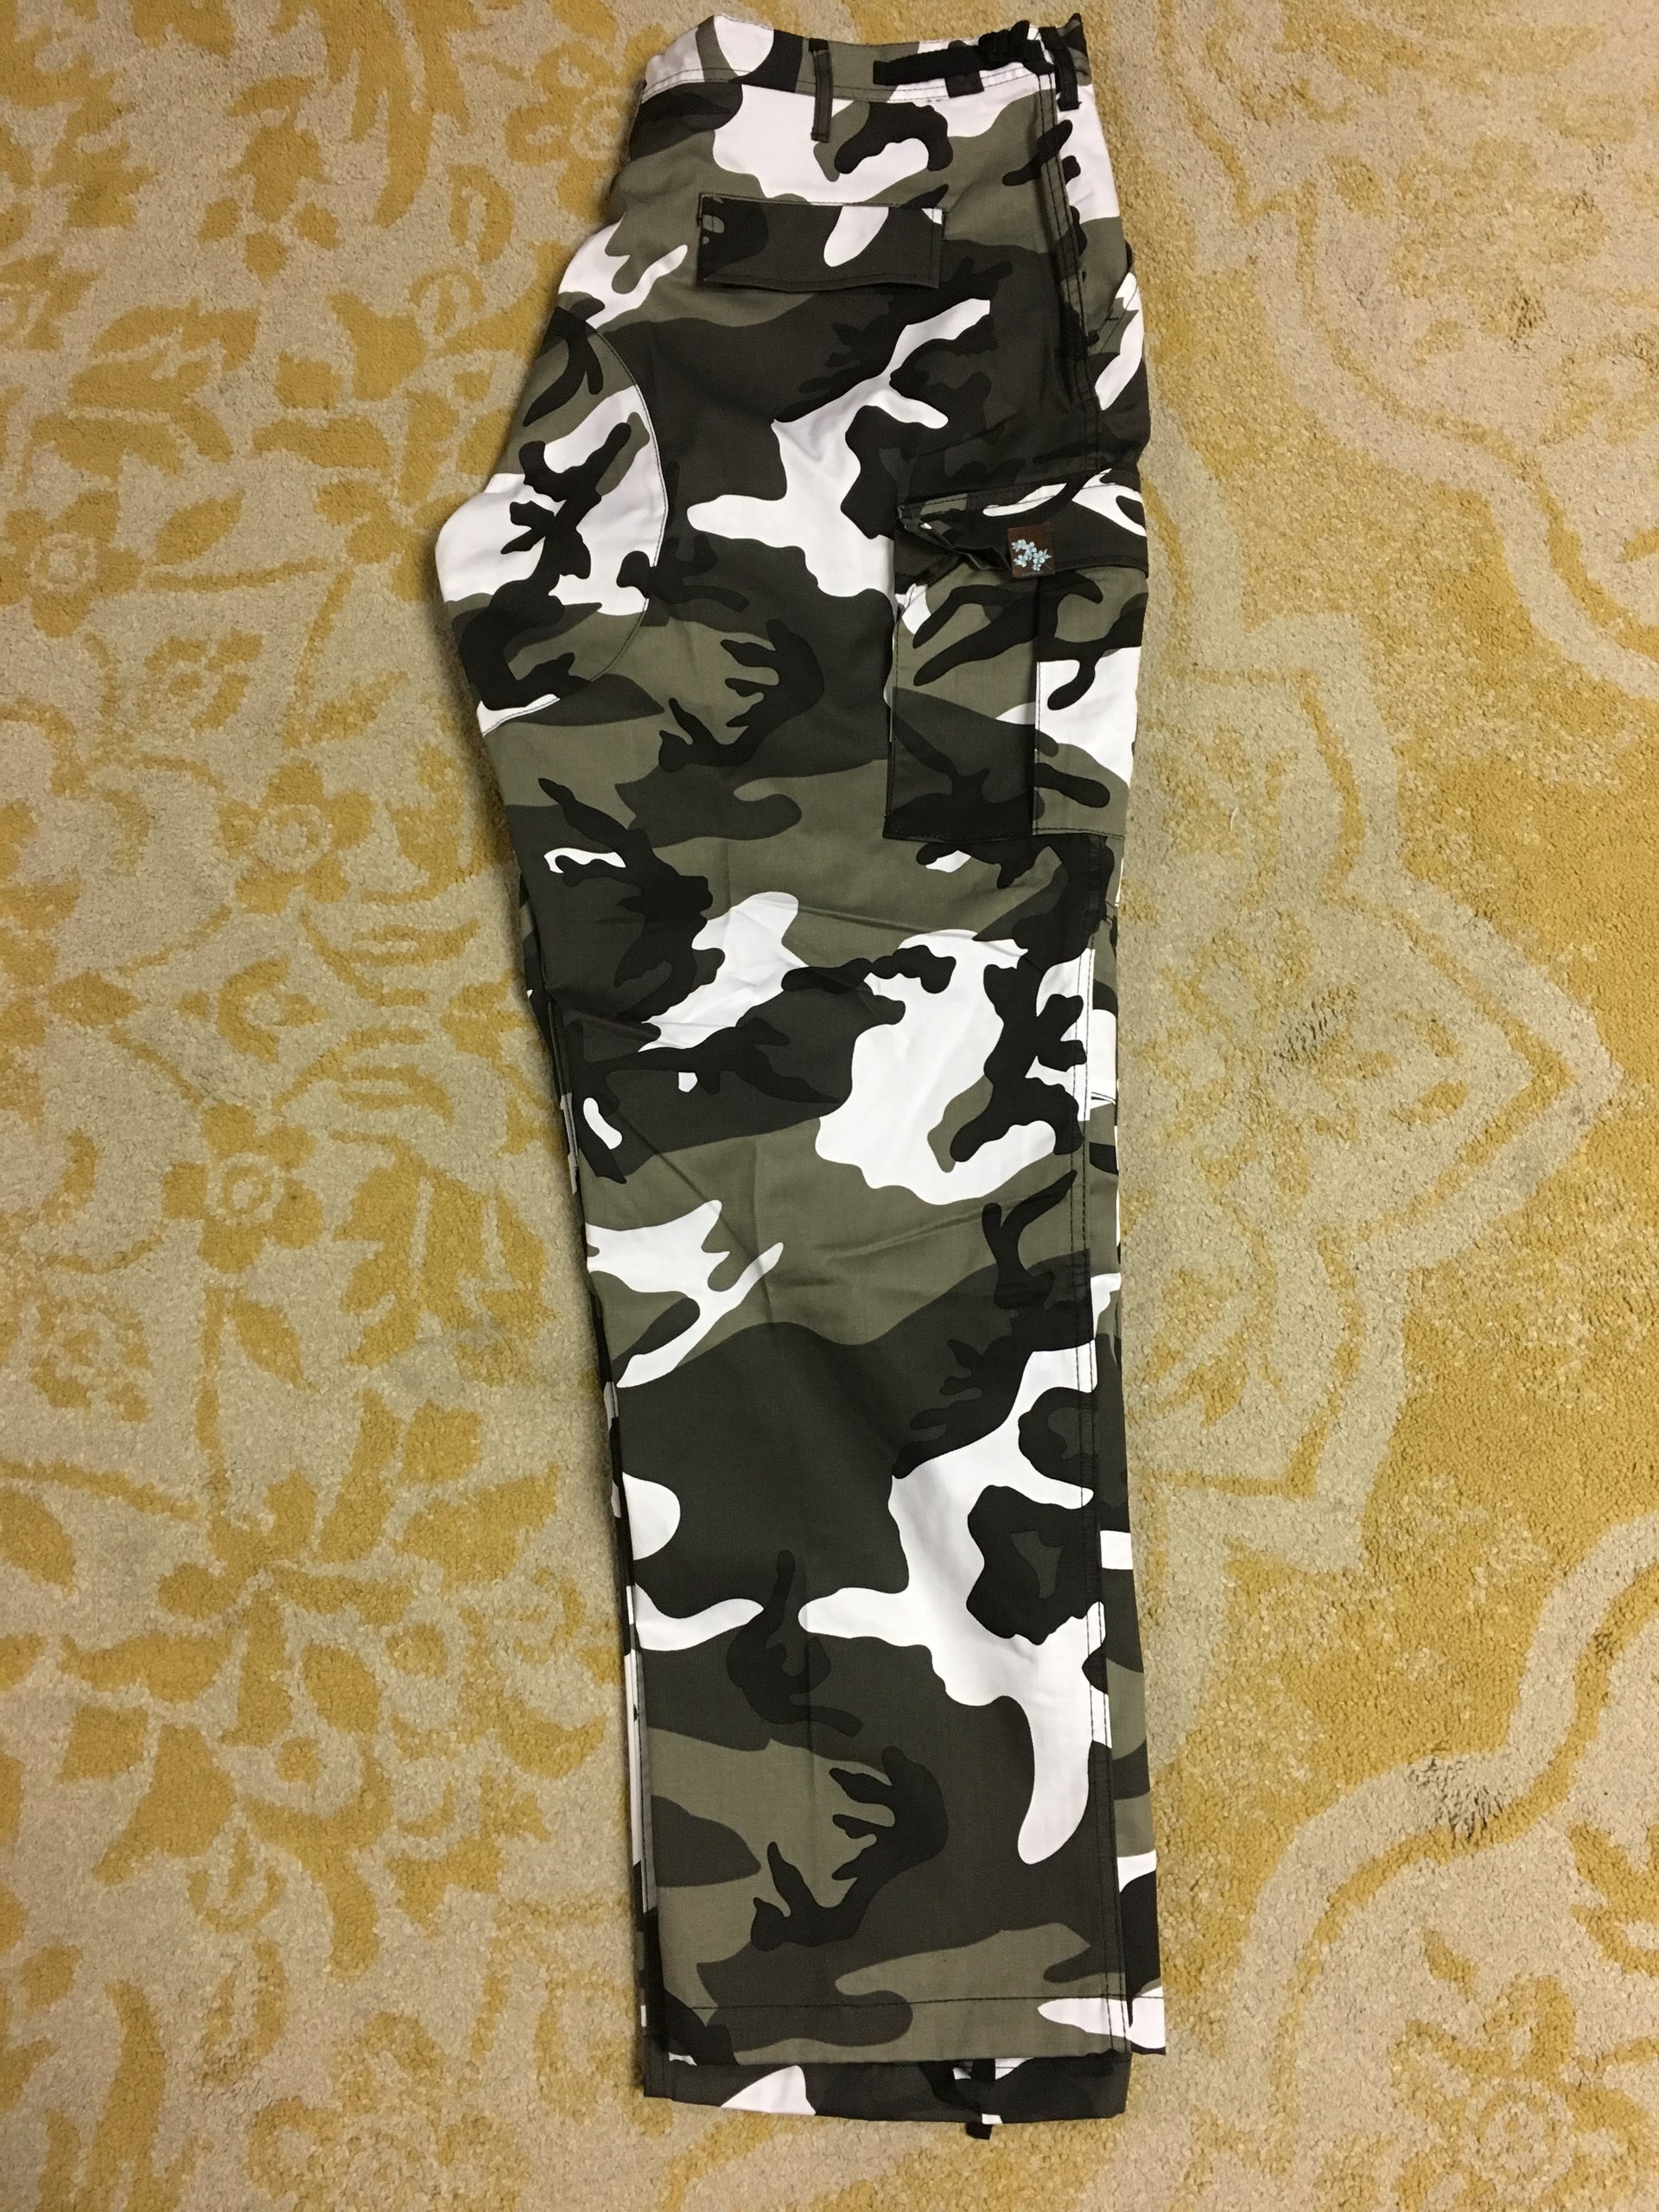 Flowers BDU Cargo Pants Urban Tiger Stripe Camo (size options listed)